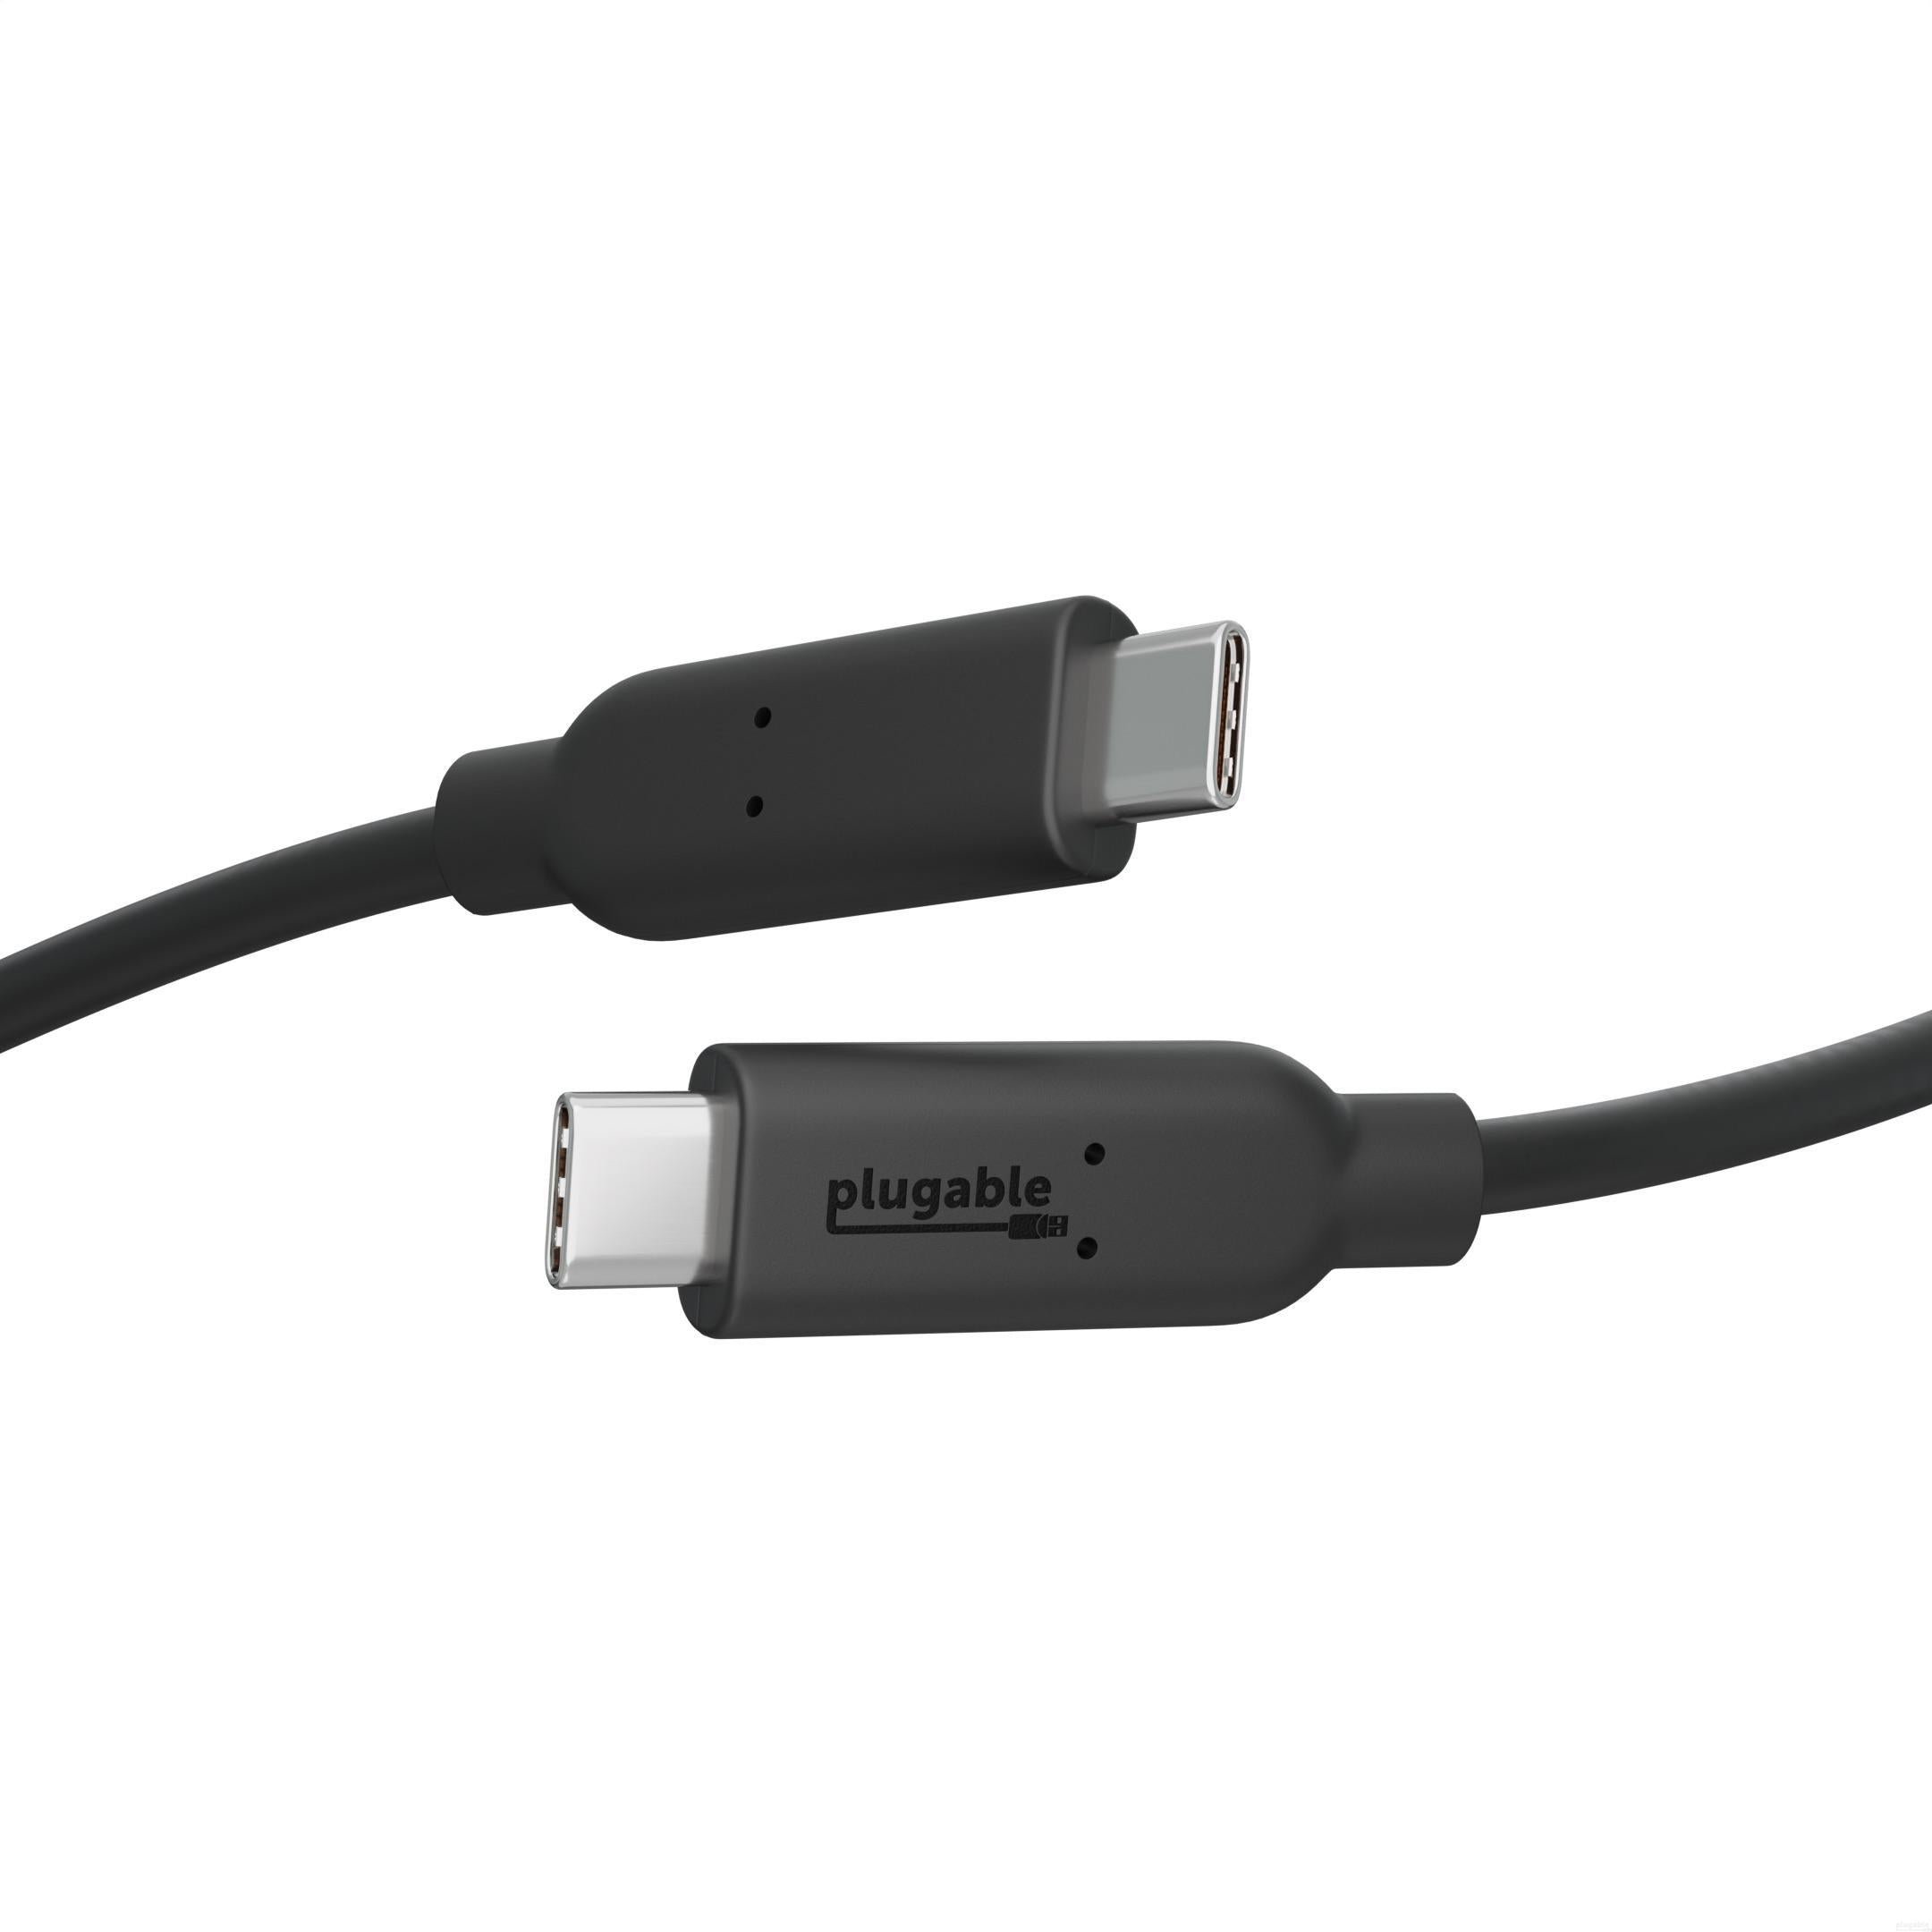 USB Type C Full Speed cable — Connective Peripherals - Global Store